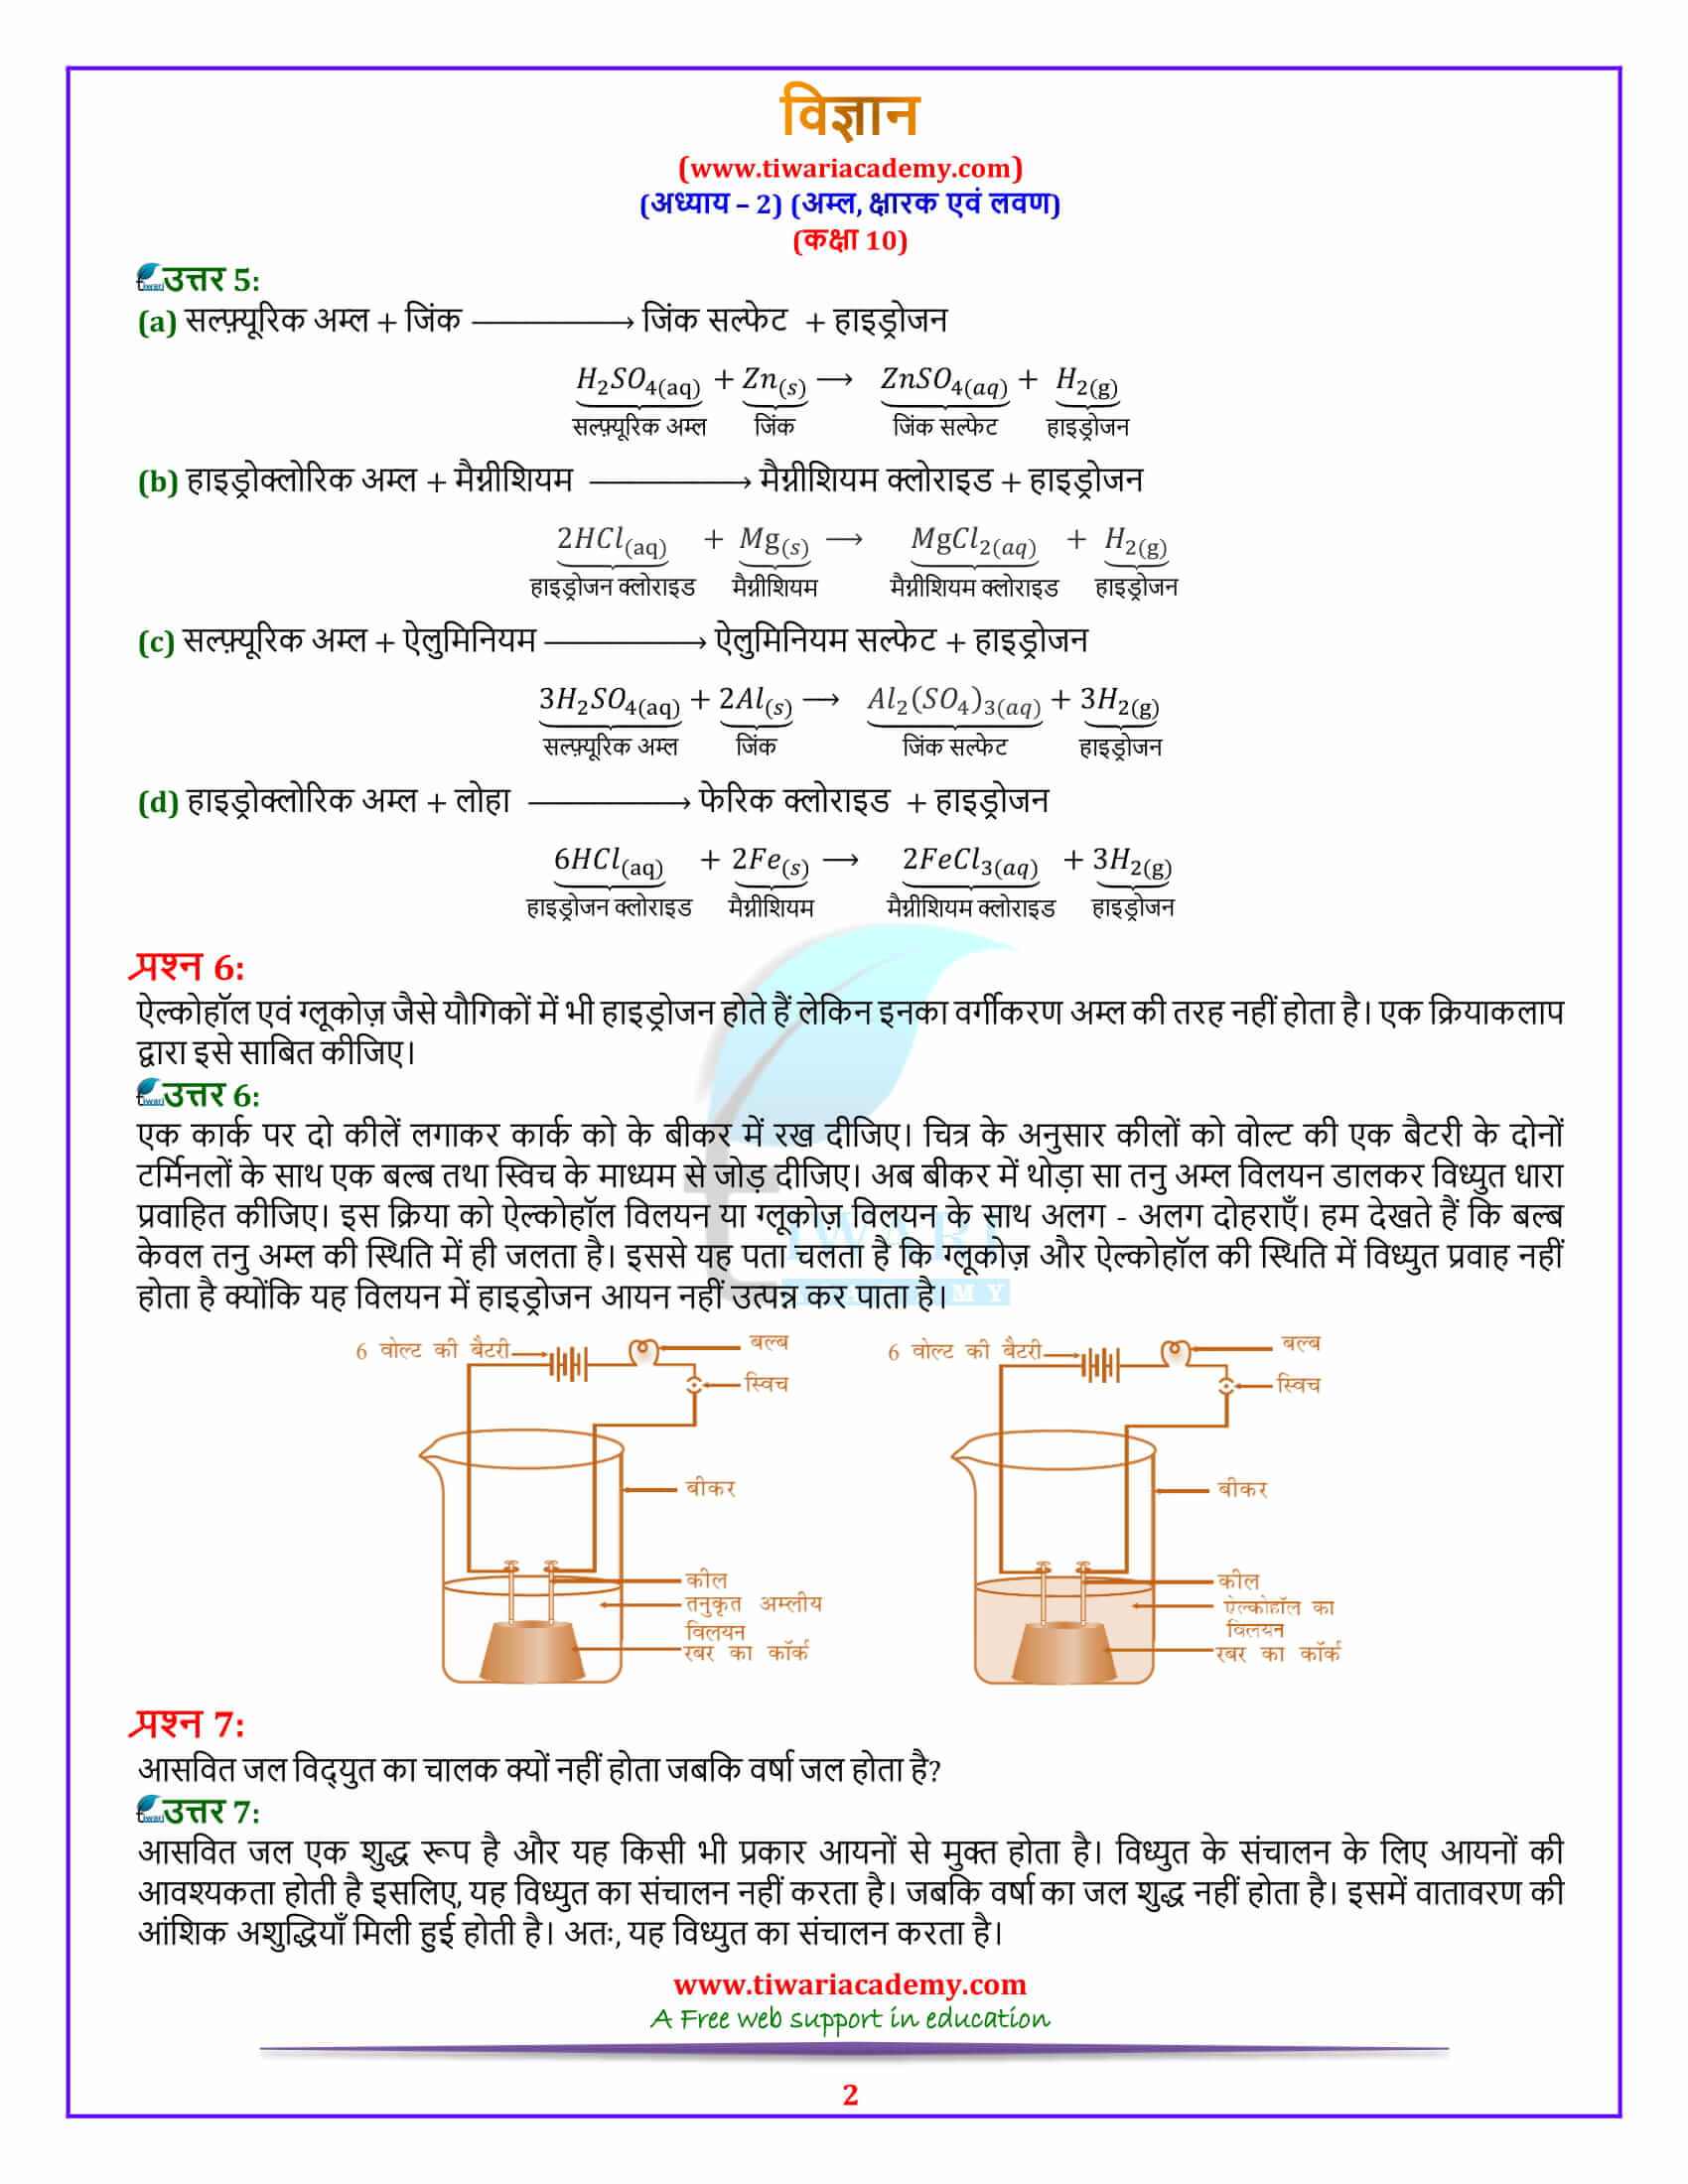 Class 10 Science Chapter 2 Acids, Bases and Salts all answers guide free